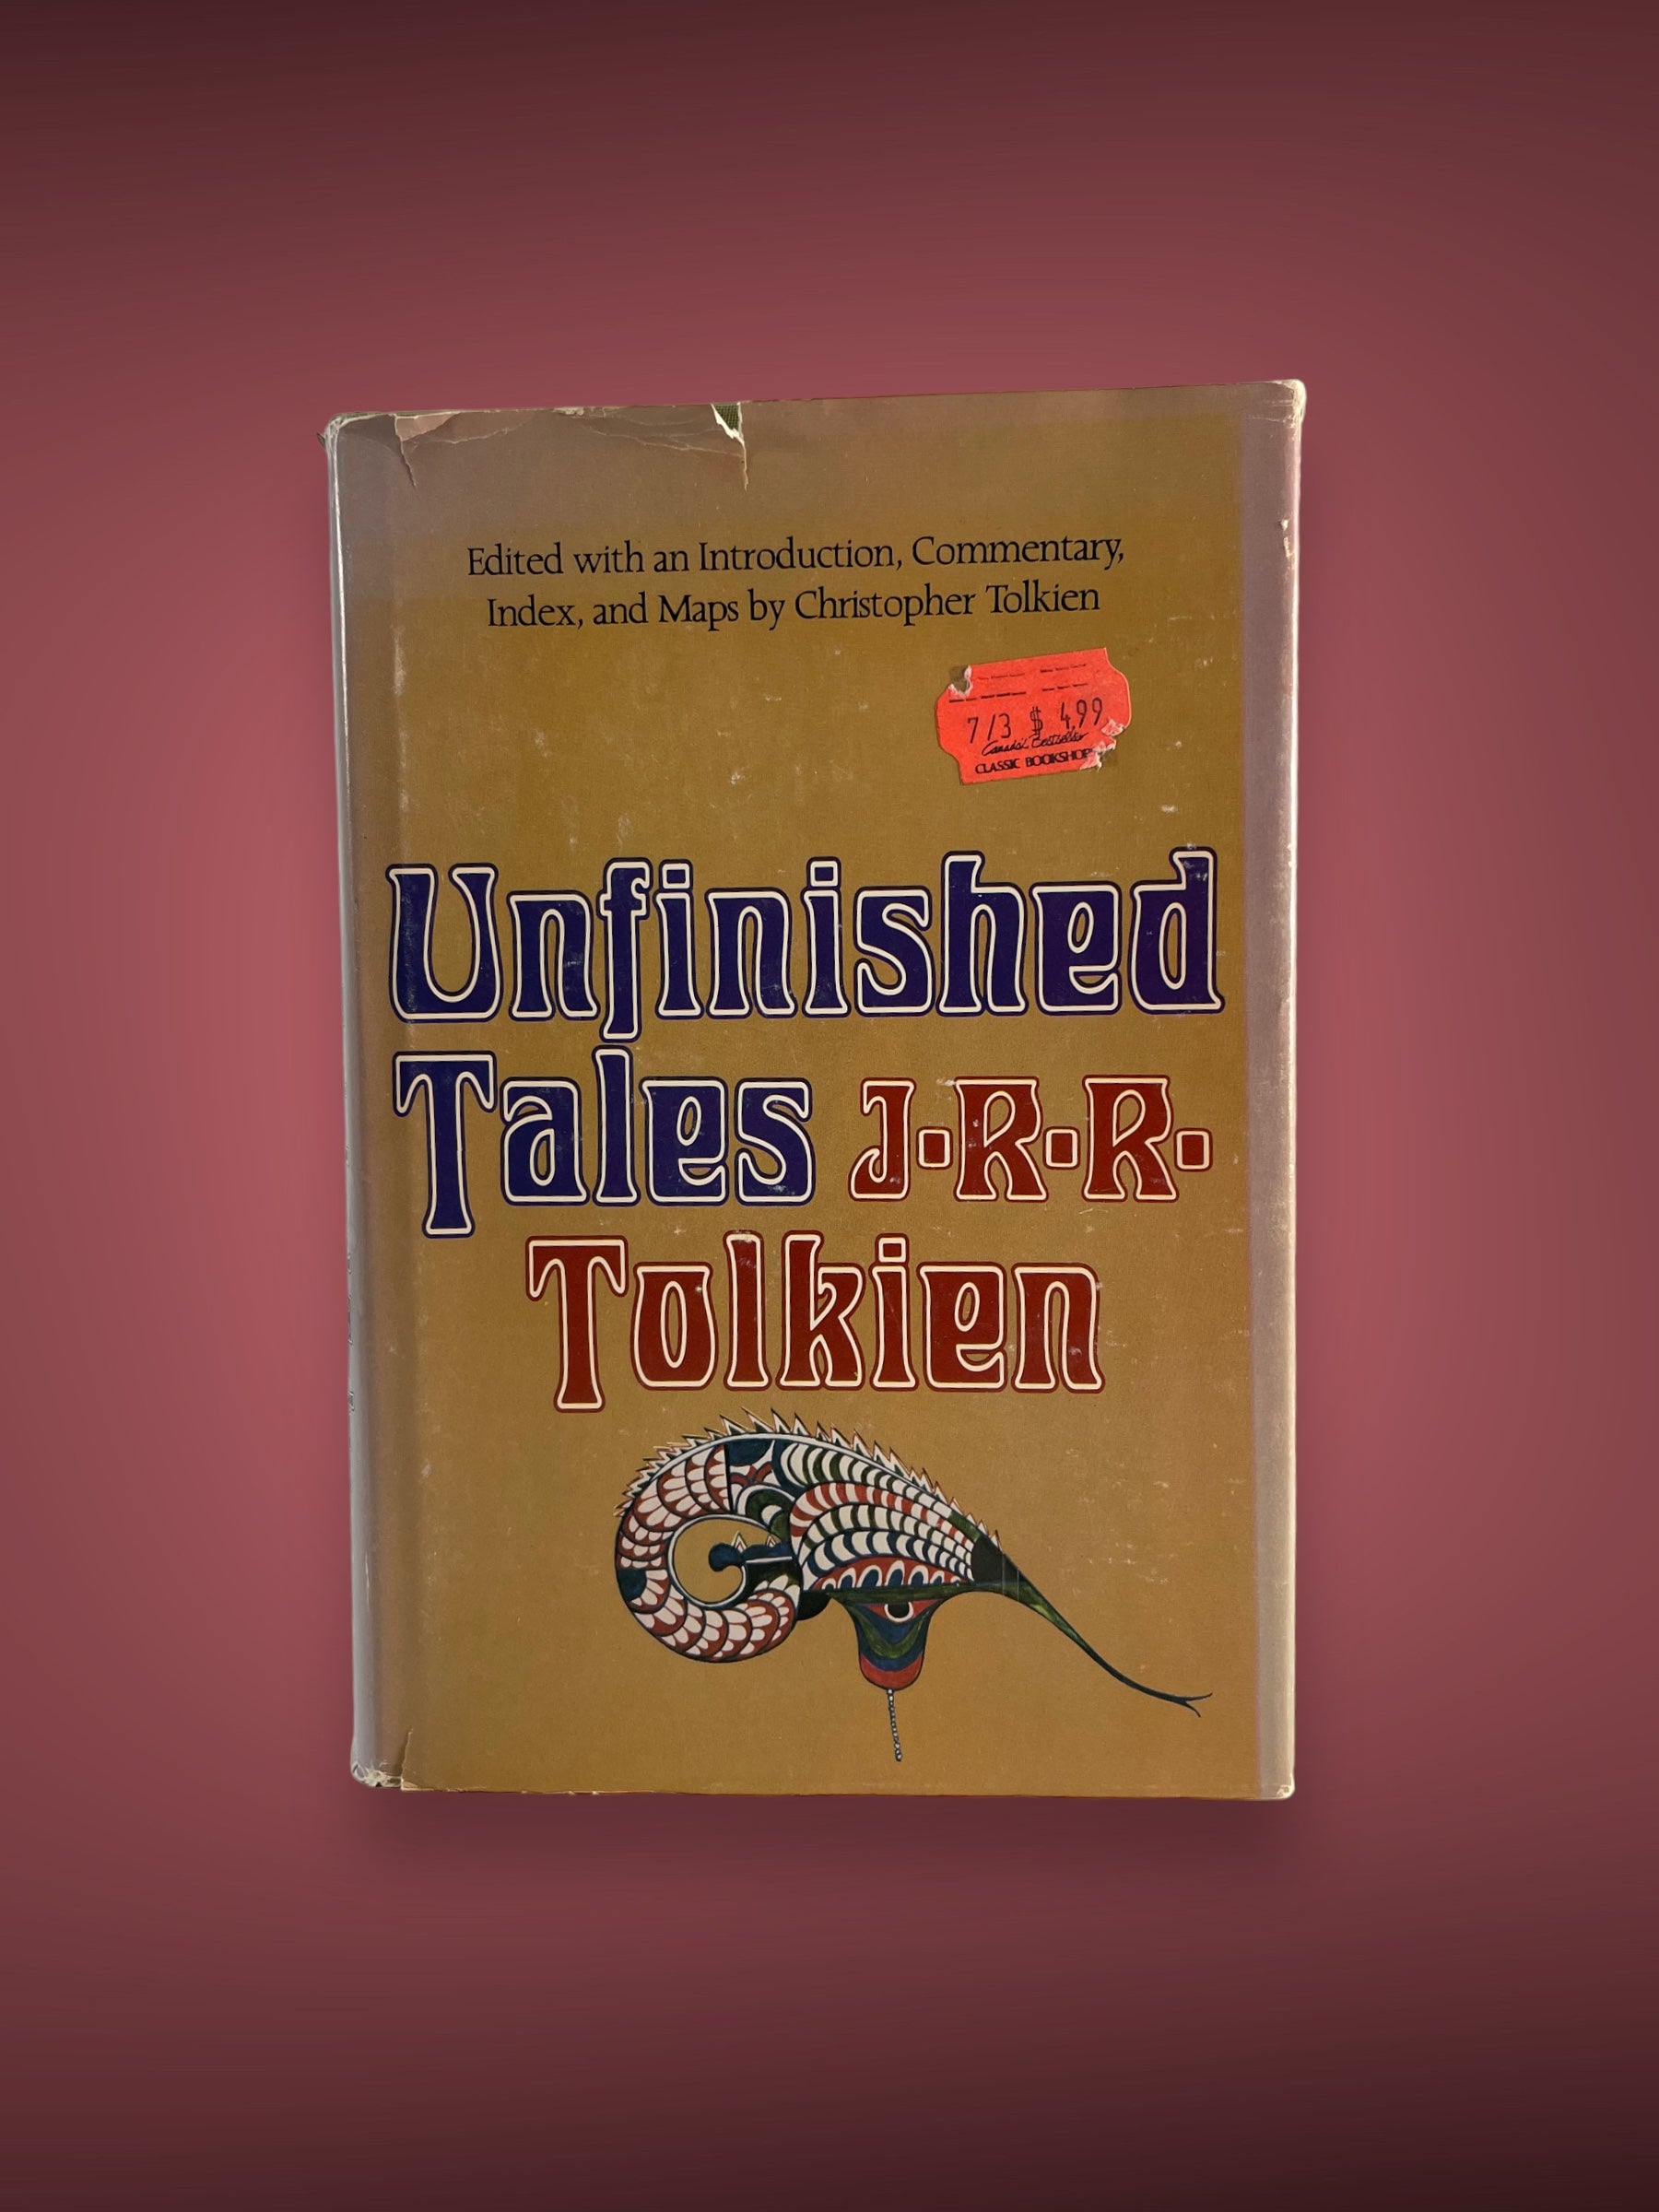 "Unfinished Tales" by J.R.R. Tolkien - 1980